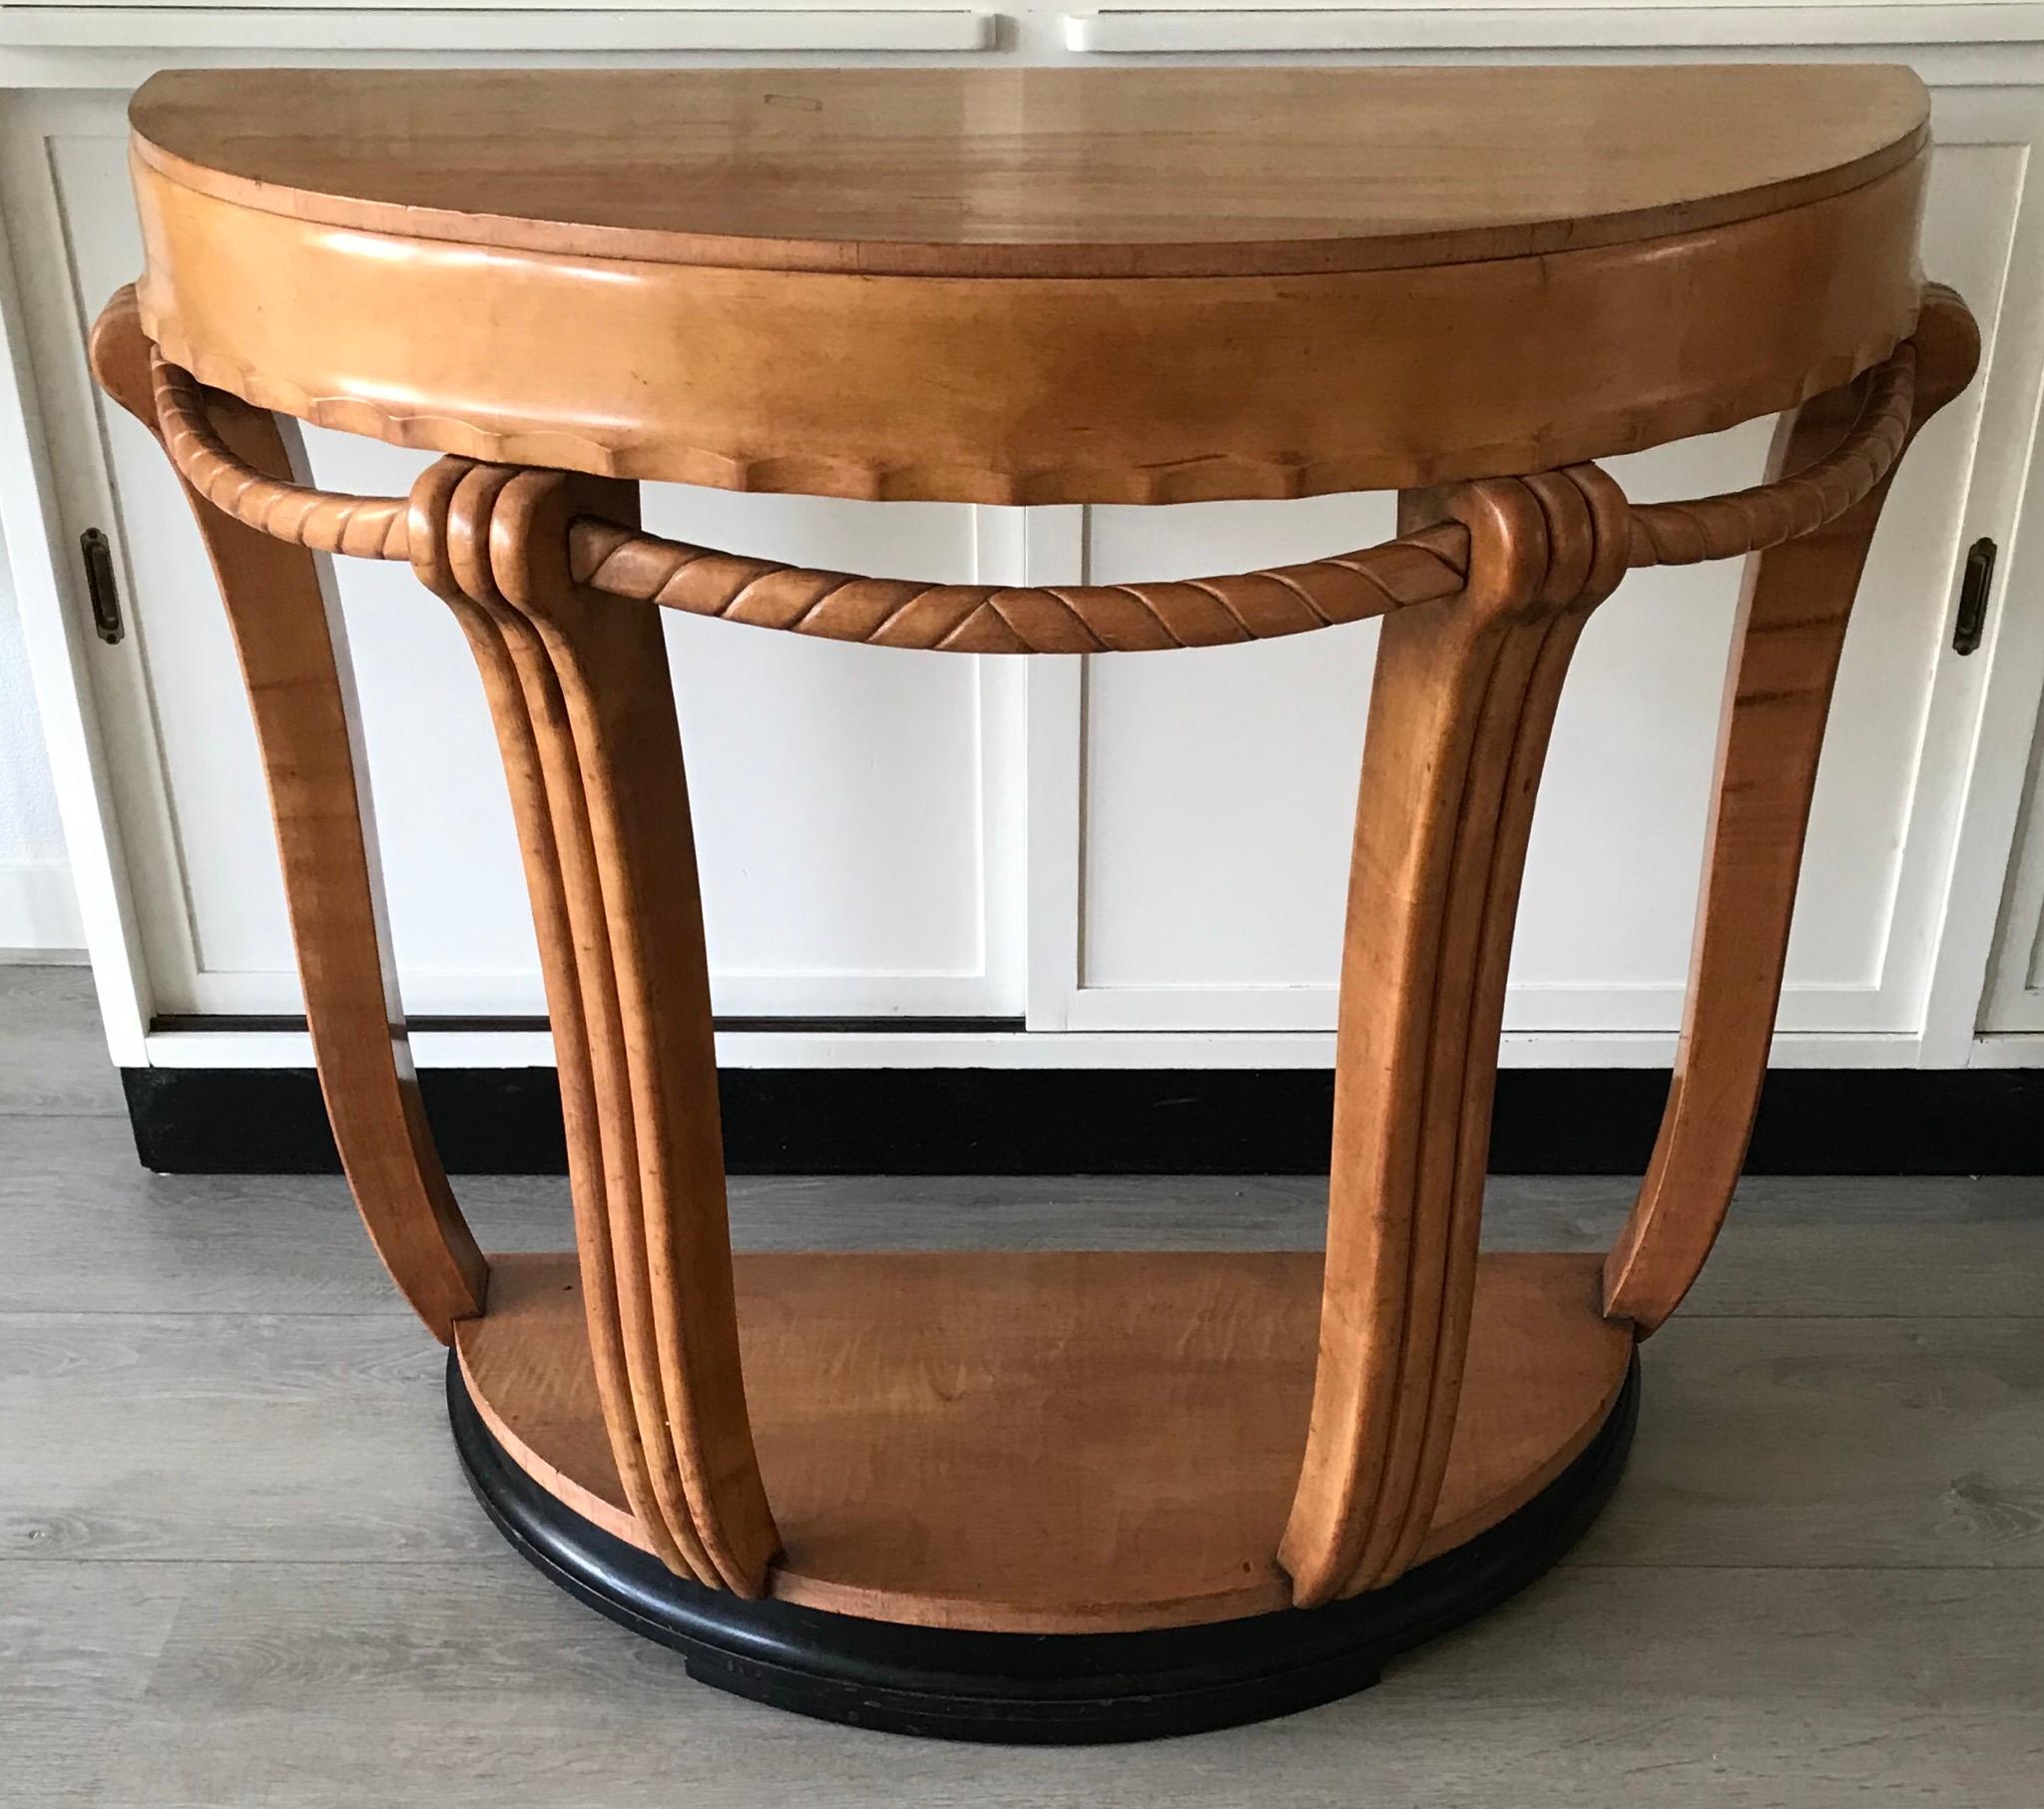 Beautiful shape and color Art Deco rounded console / sidetable.

If you are looking for a sizeable and impressive sidetable to grace your entrance or an other living space then this Fine and rare example from the early 20th century could be perfect